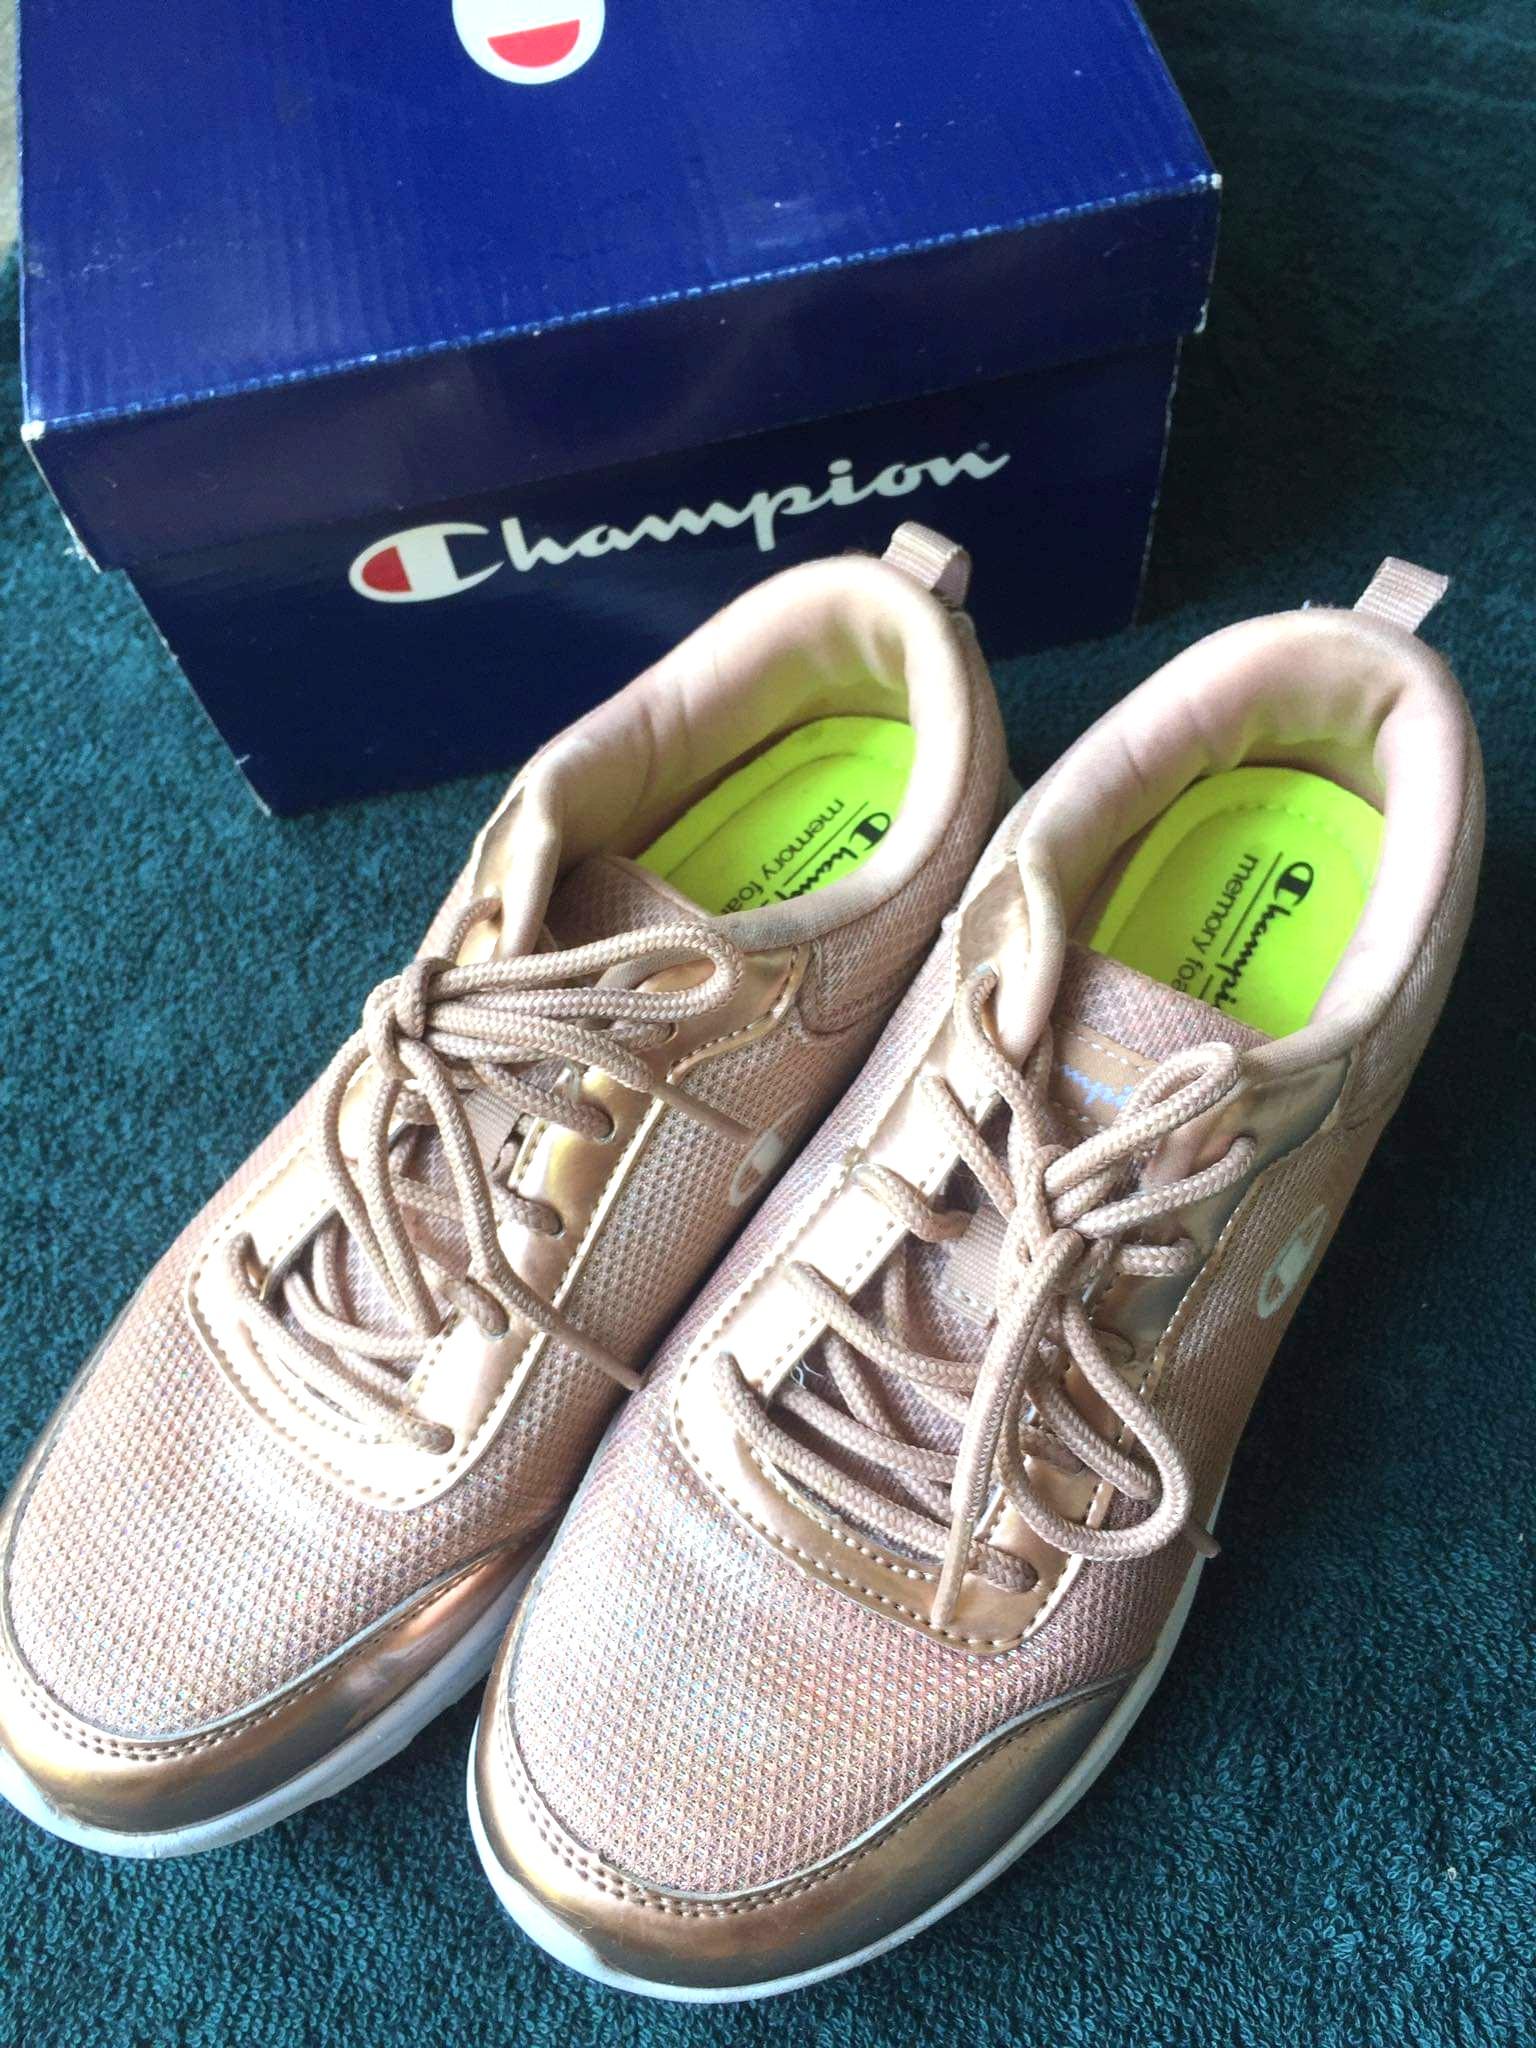 rose gold champion shoes